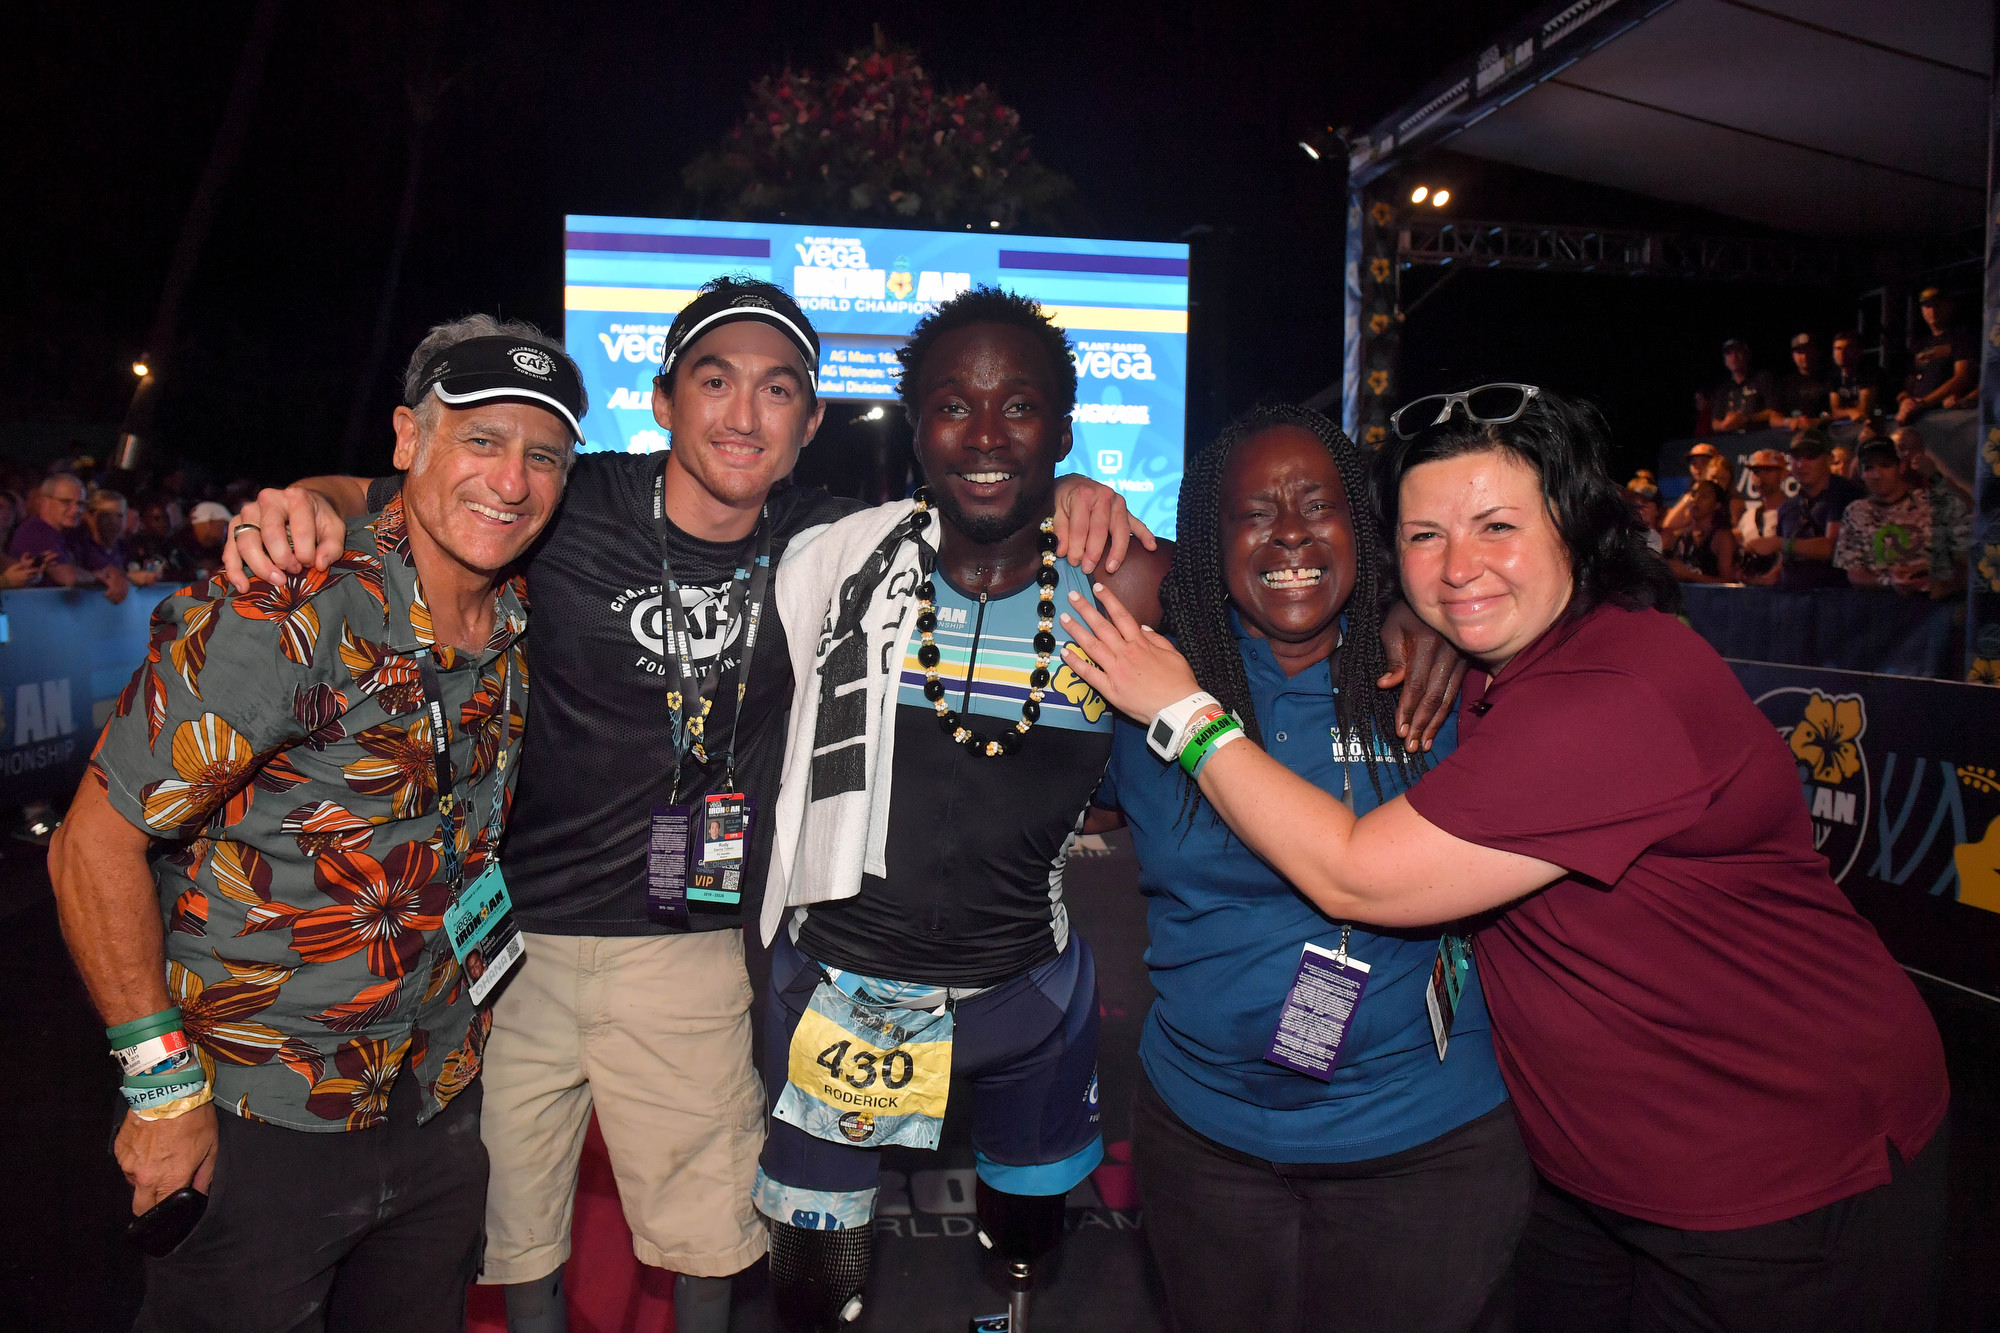 Roderick Sewell finishing IRONMAN KONA, first bilateral above the knee amputee to do so